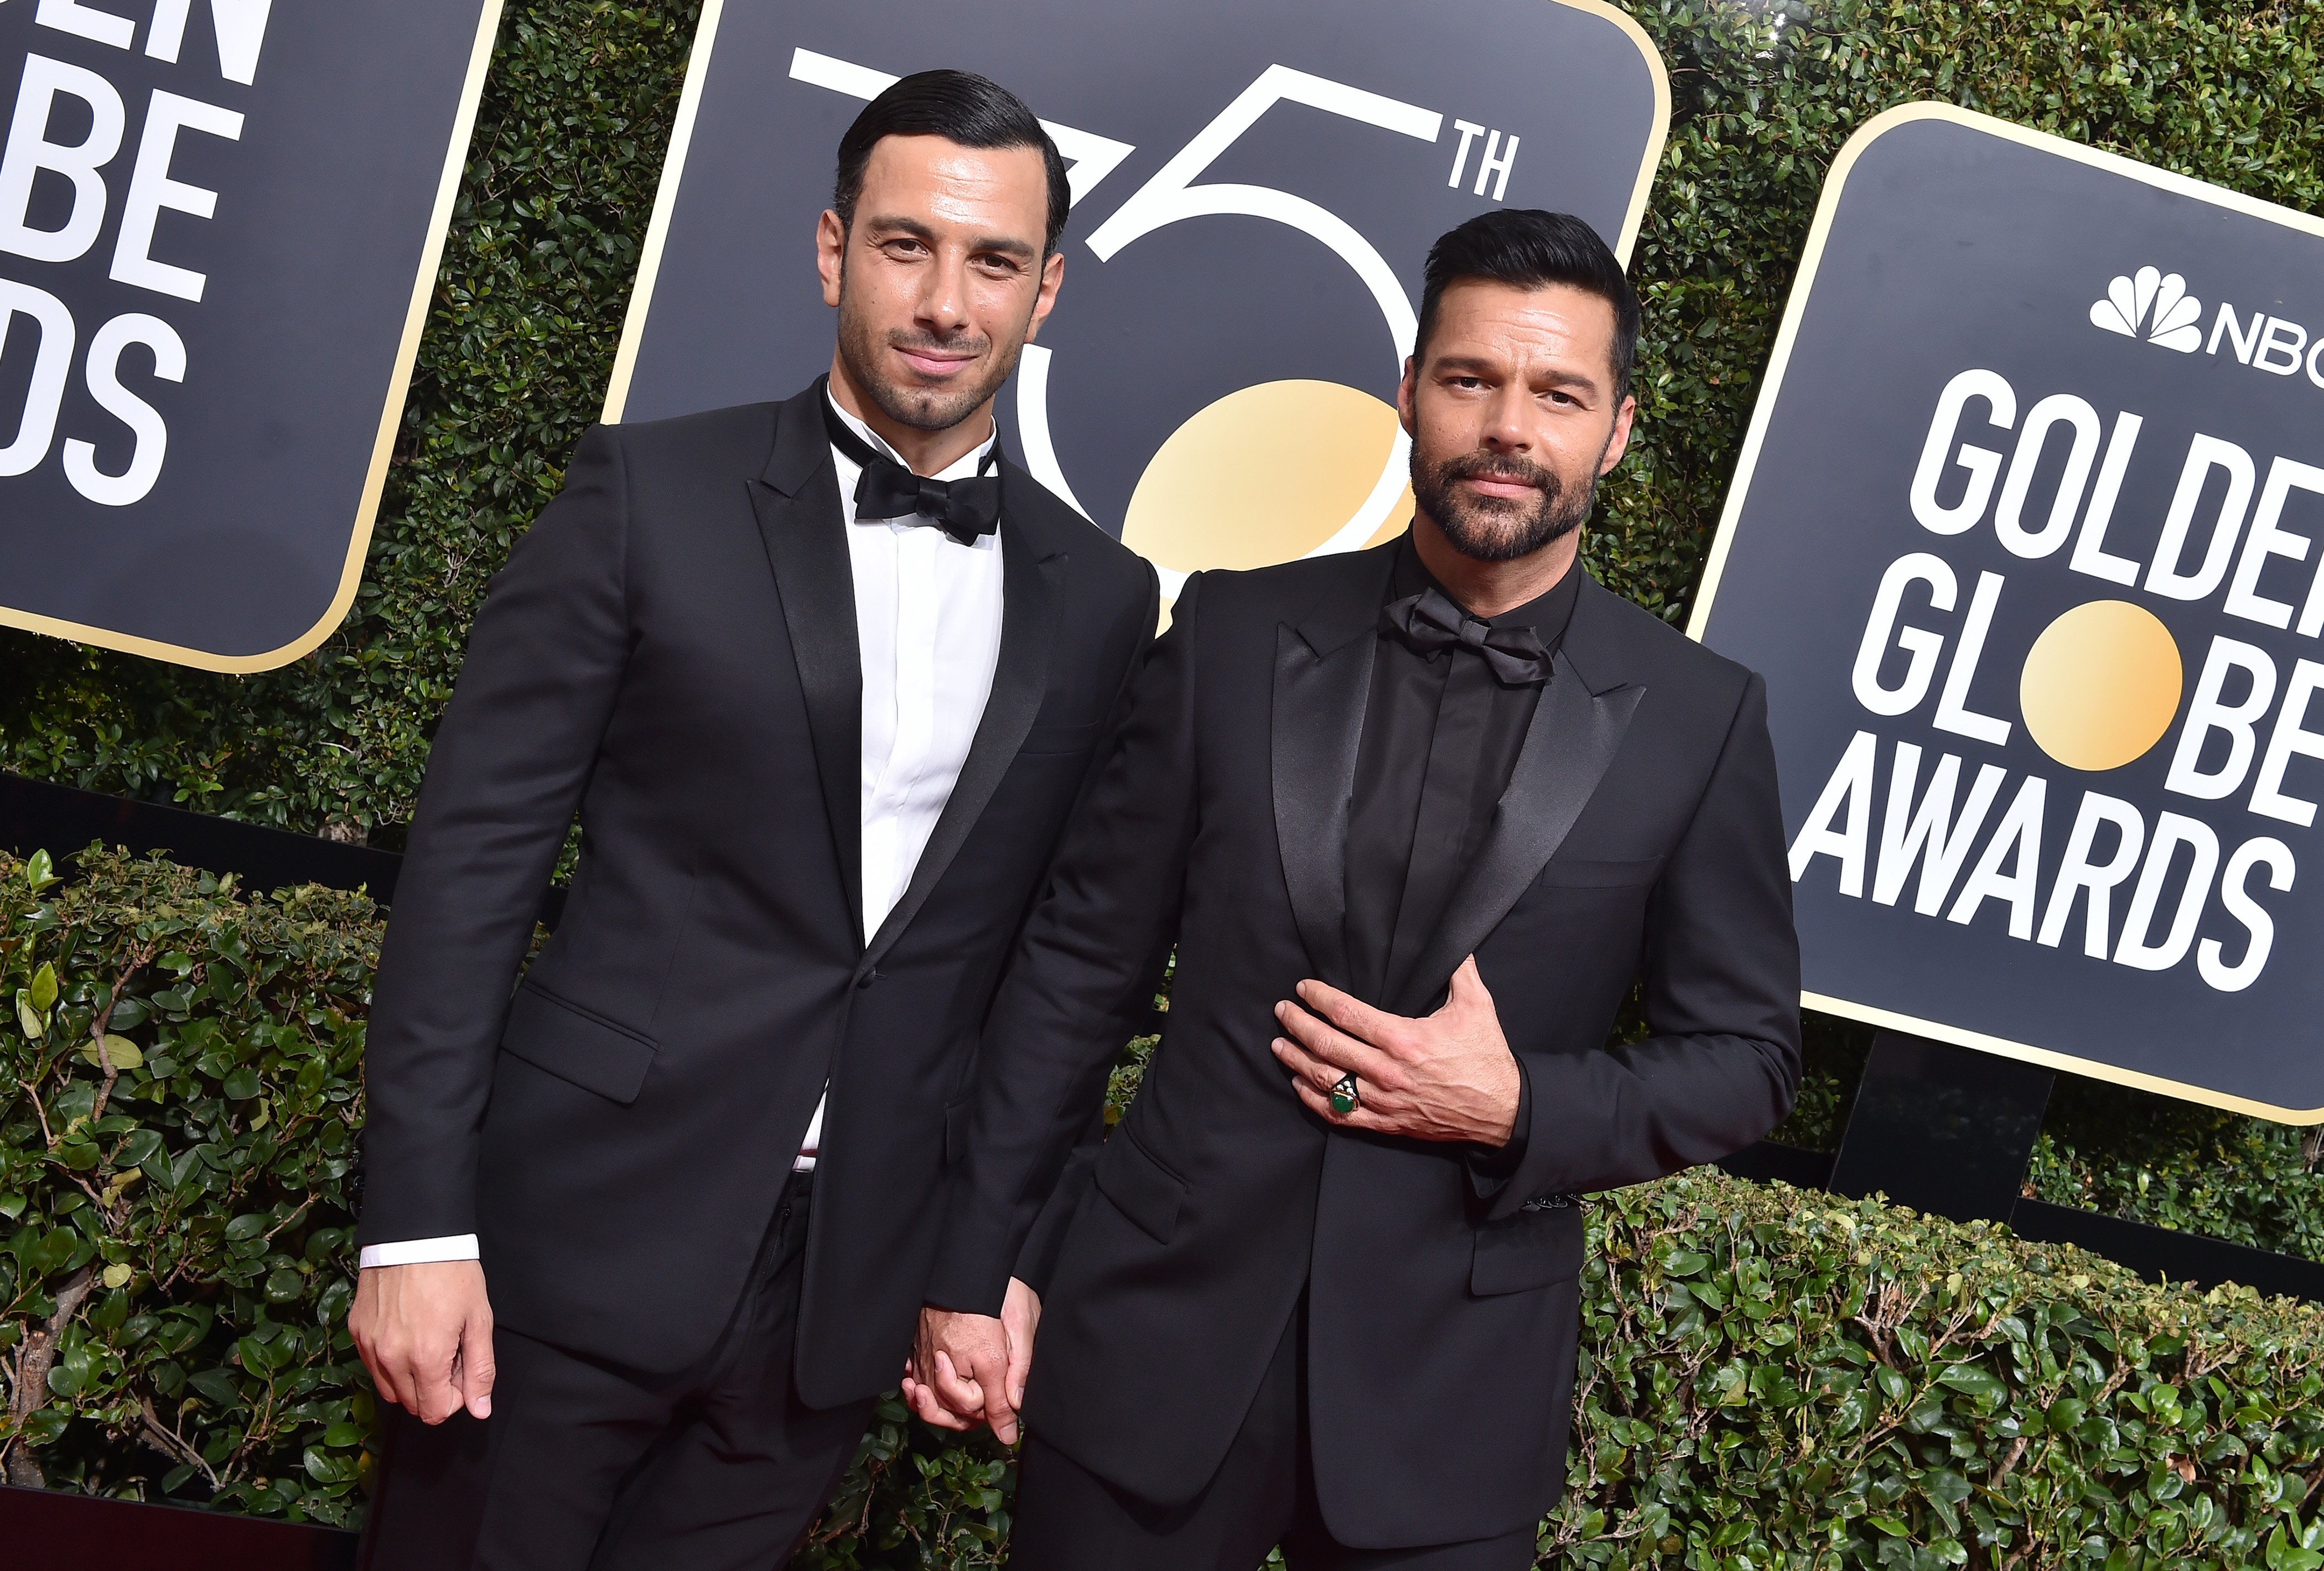 Ricky Martin and his spouse Jwan Yosef holding hands on the red carpet at the 75th Annual Golden Globe Awards